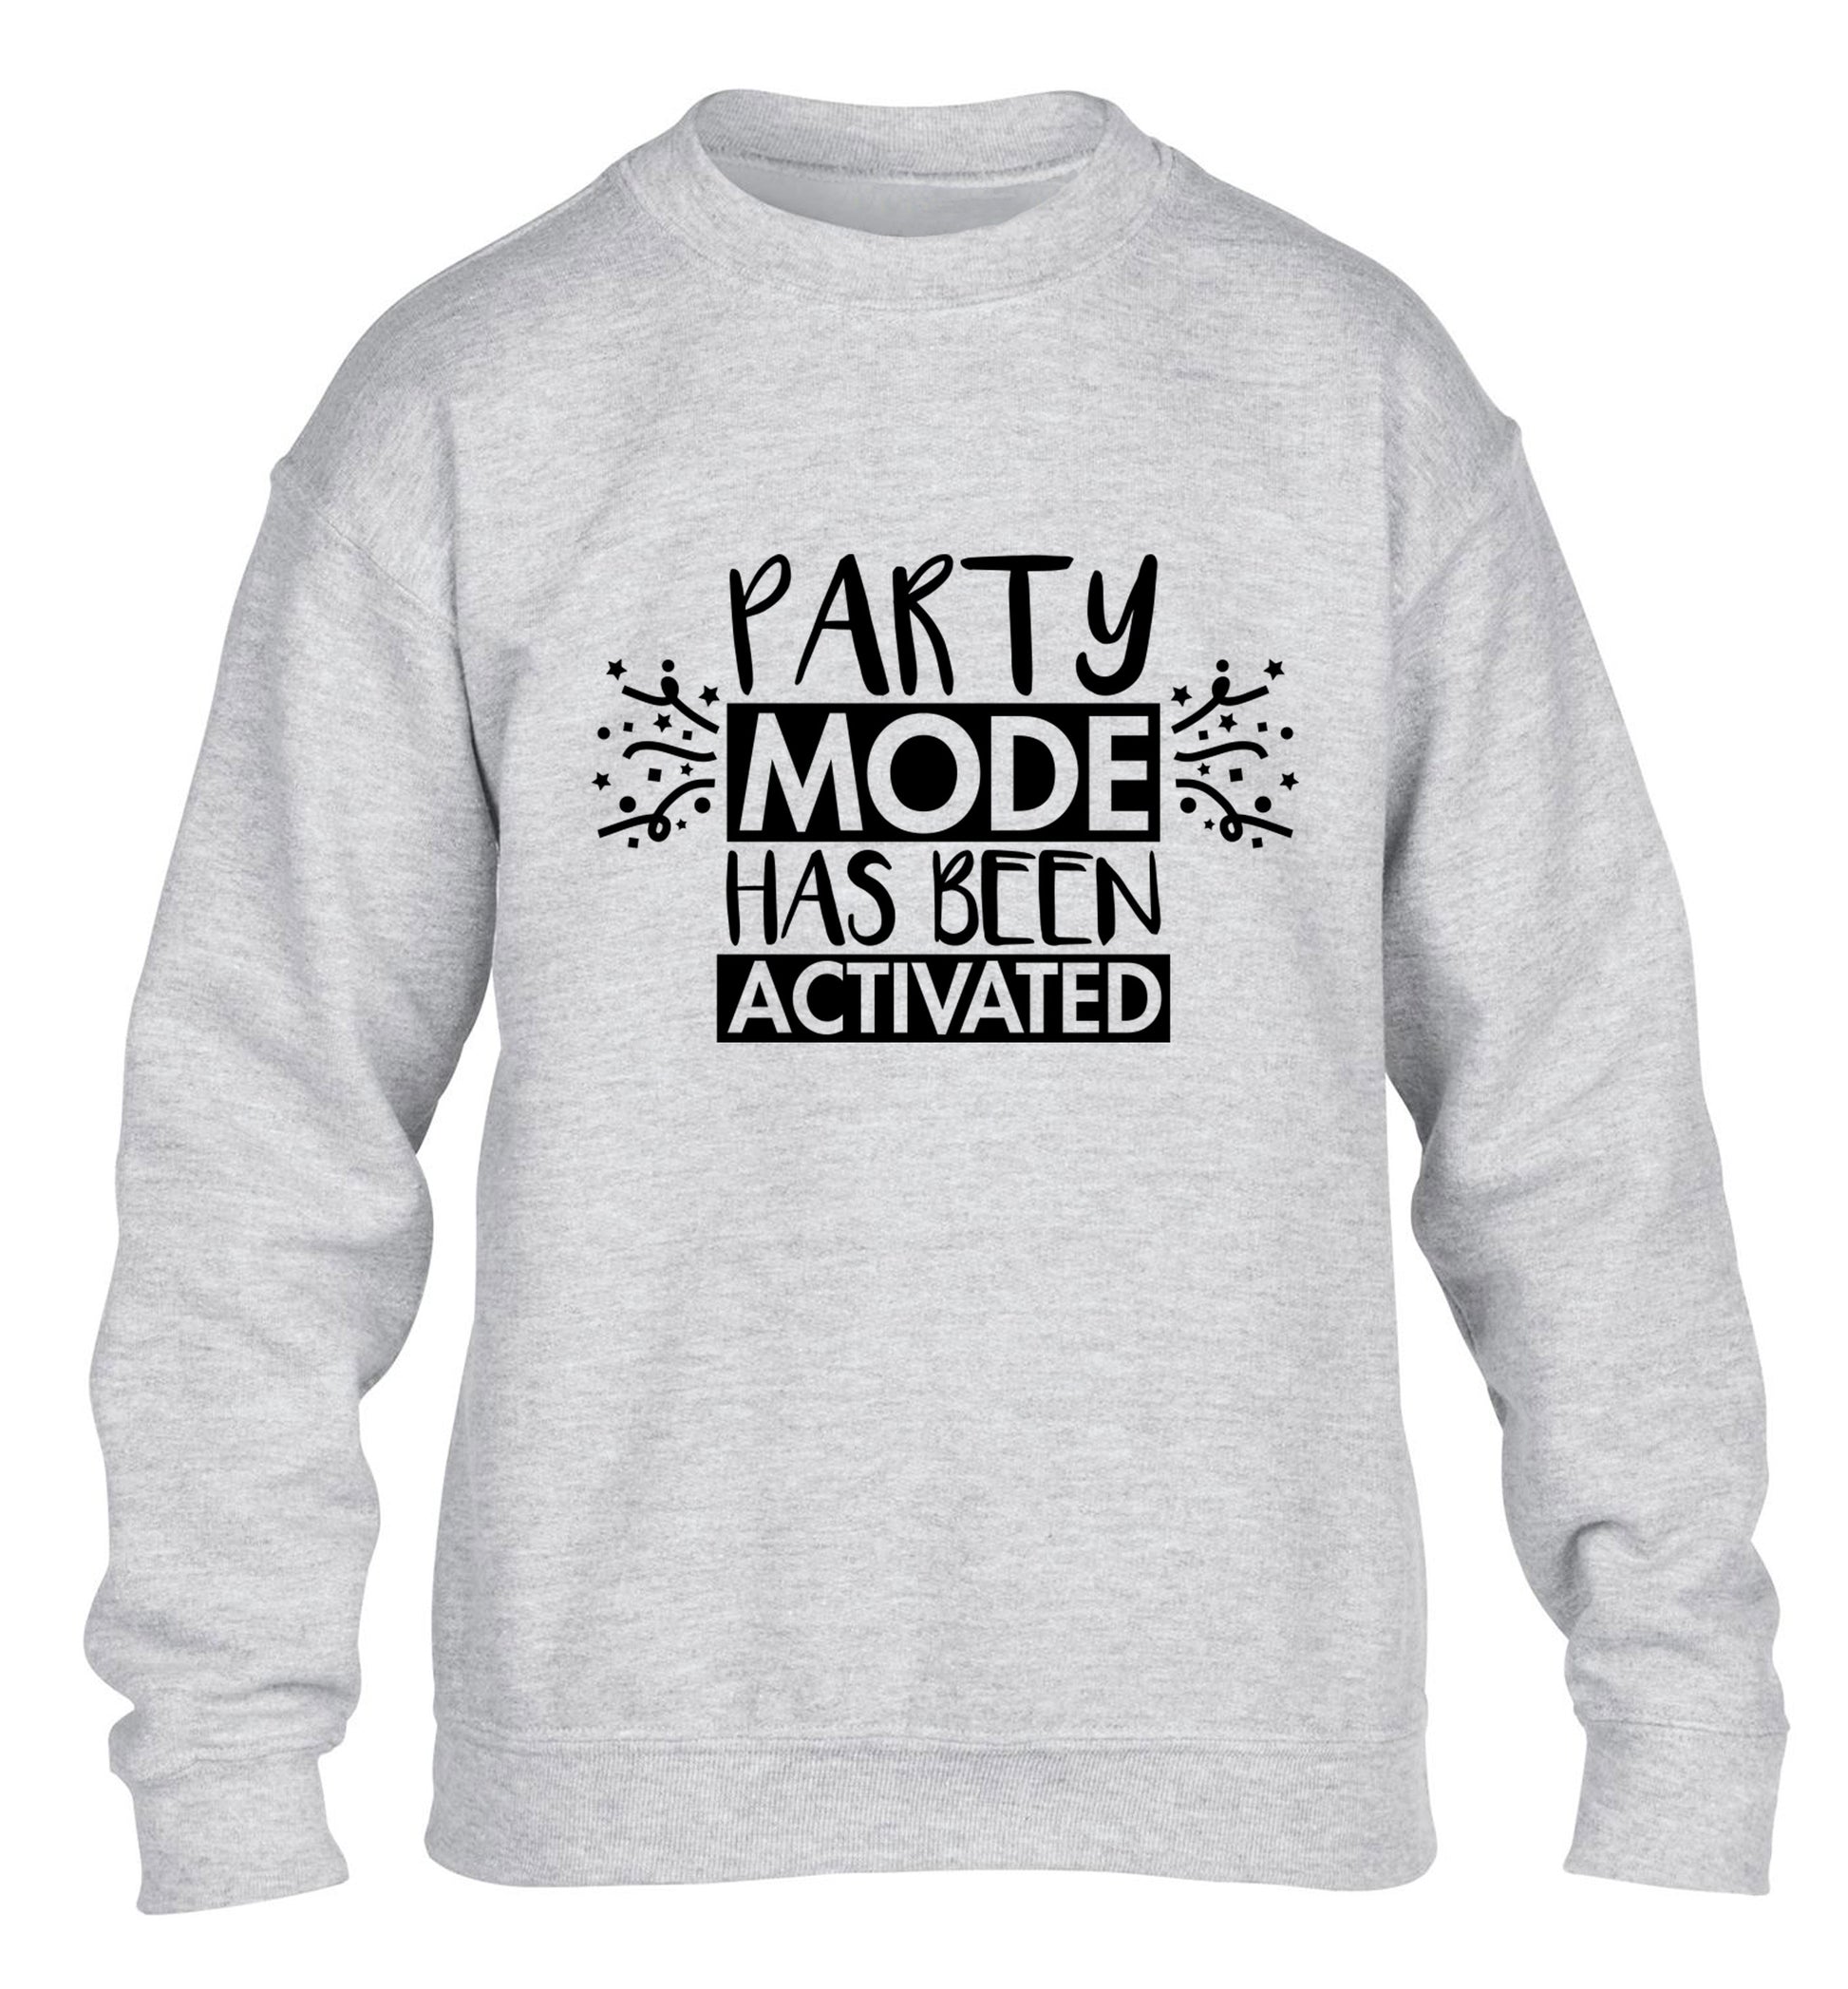 Please do not disturb party mode has been activated children's grey sweater 12-14 Years